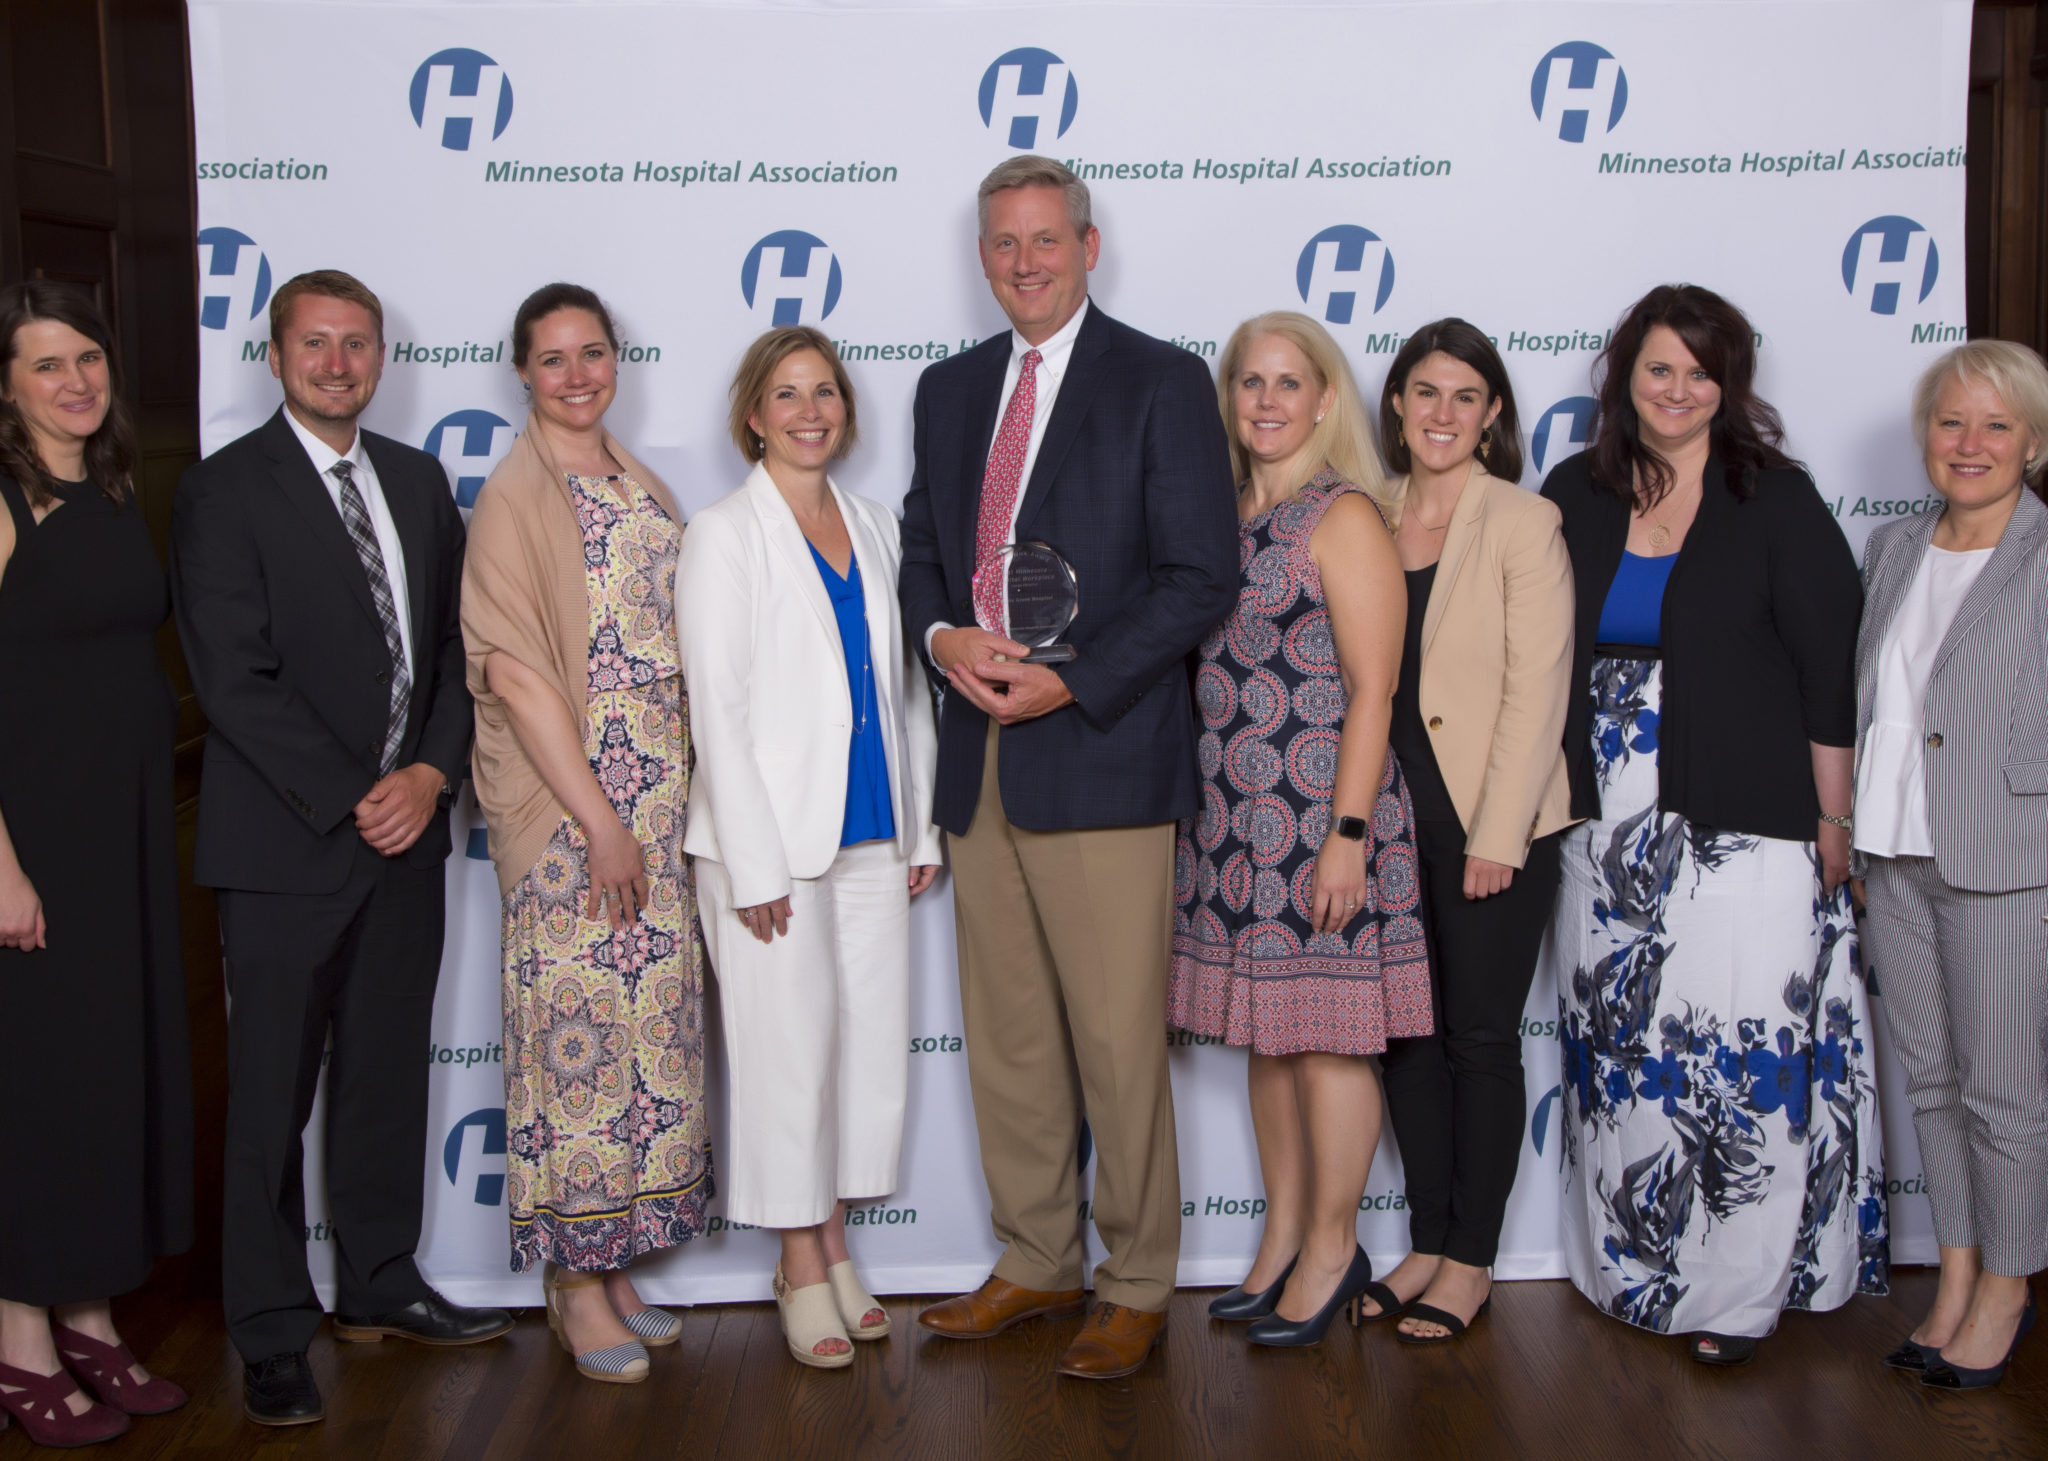 Group of hospital leaders smiling with award